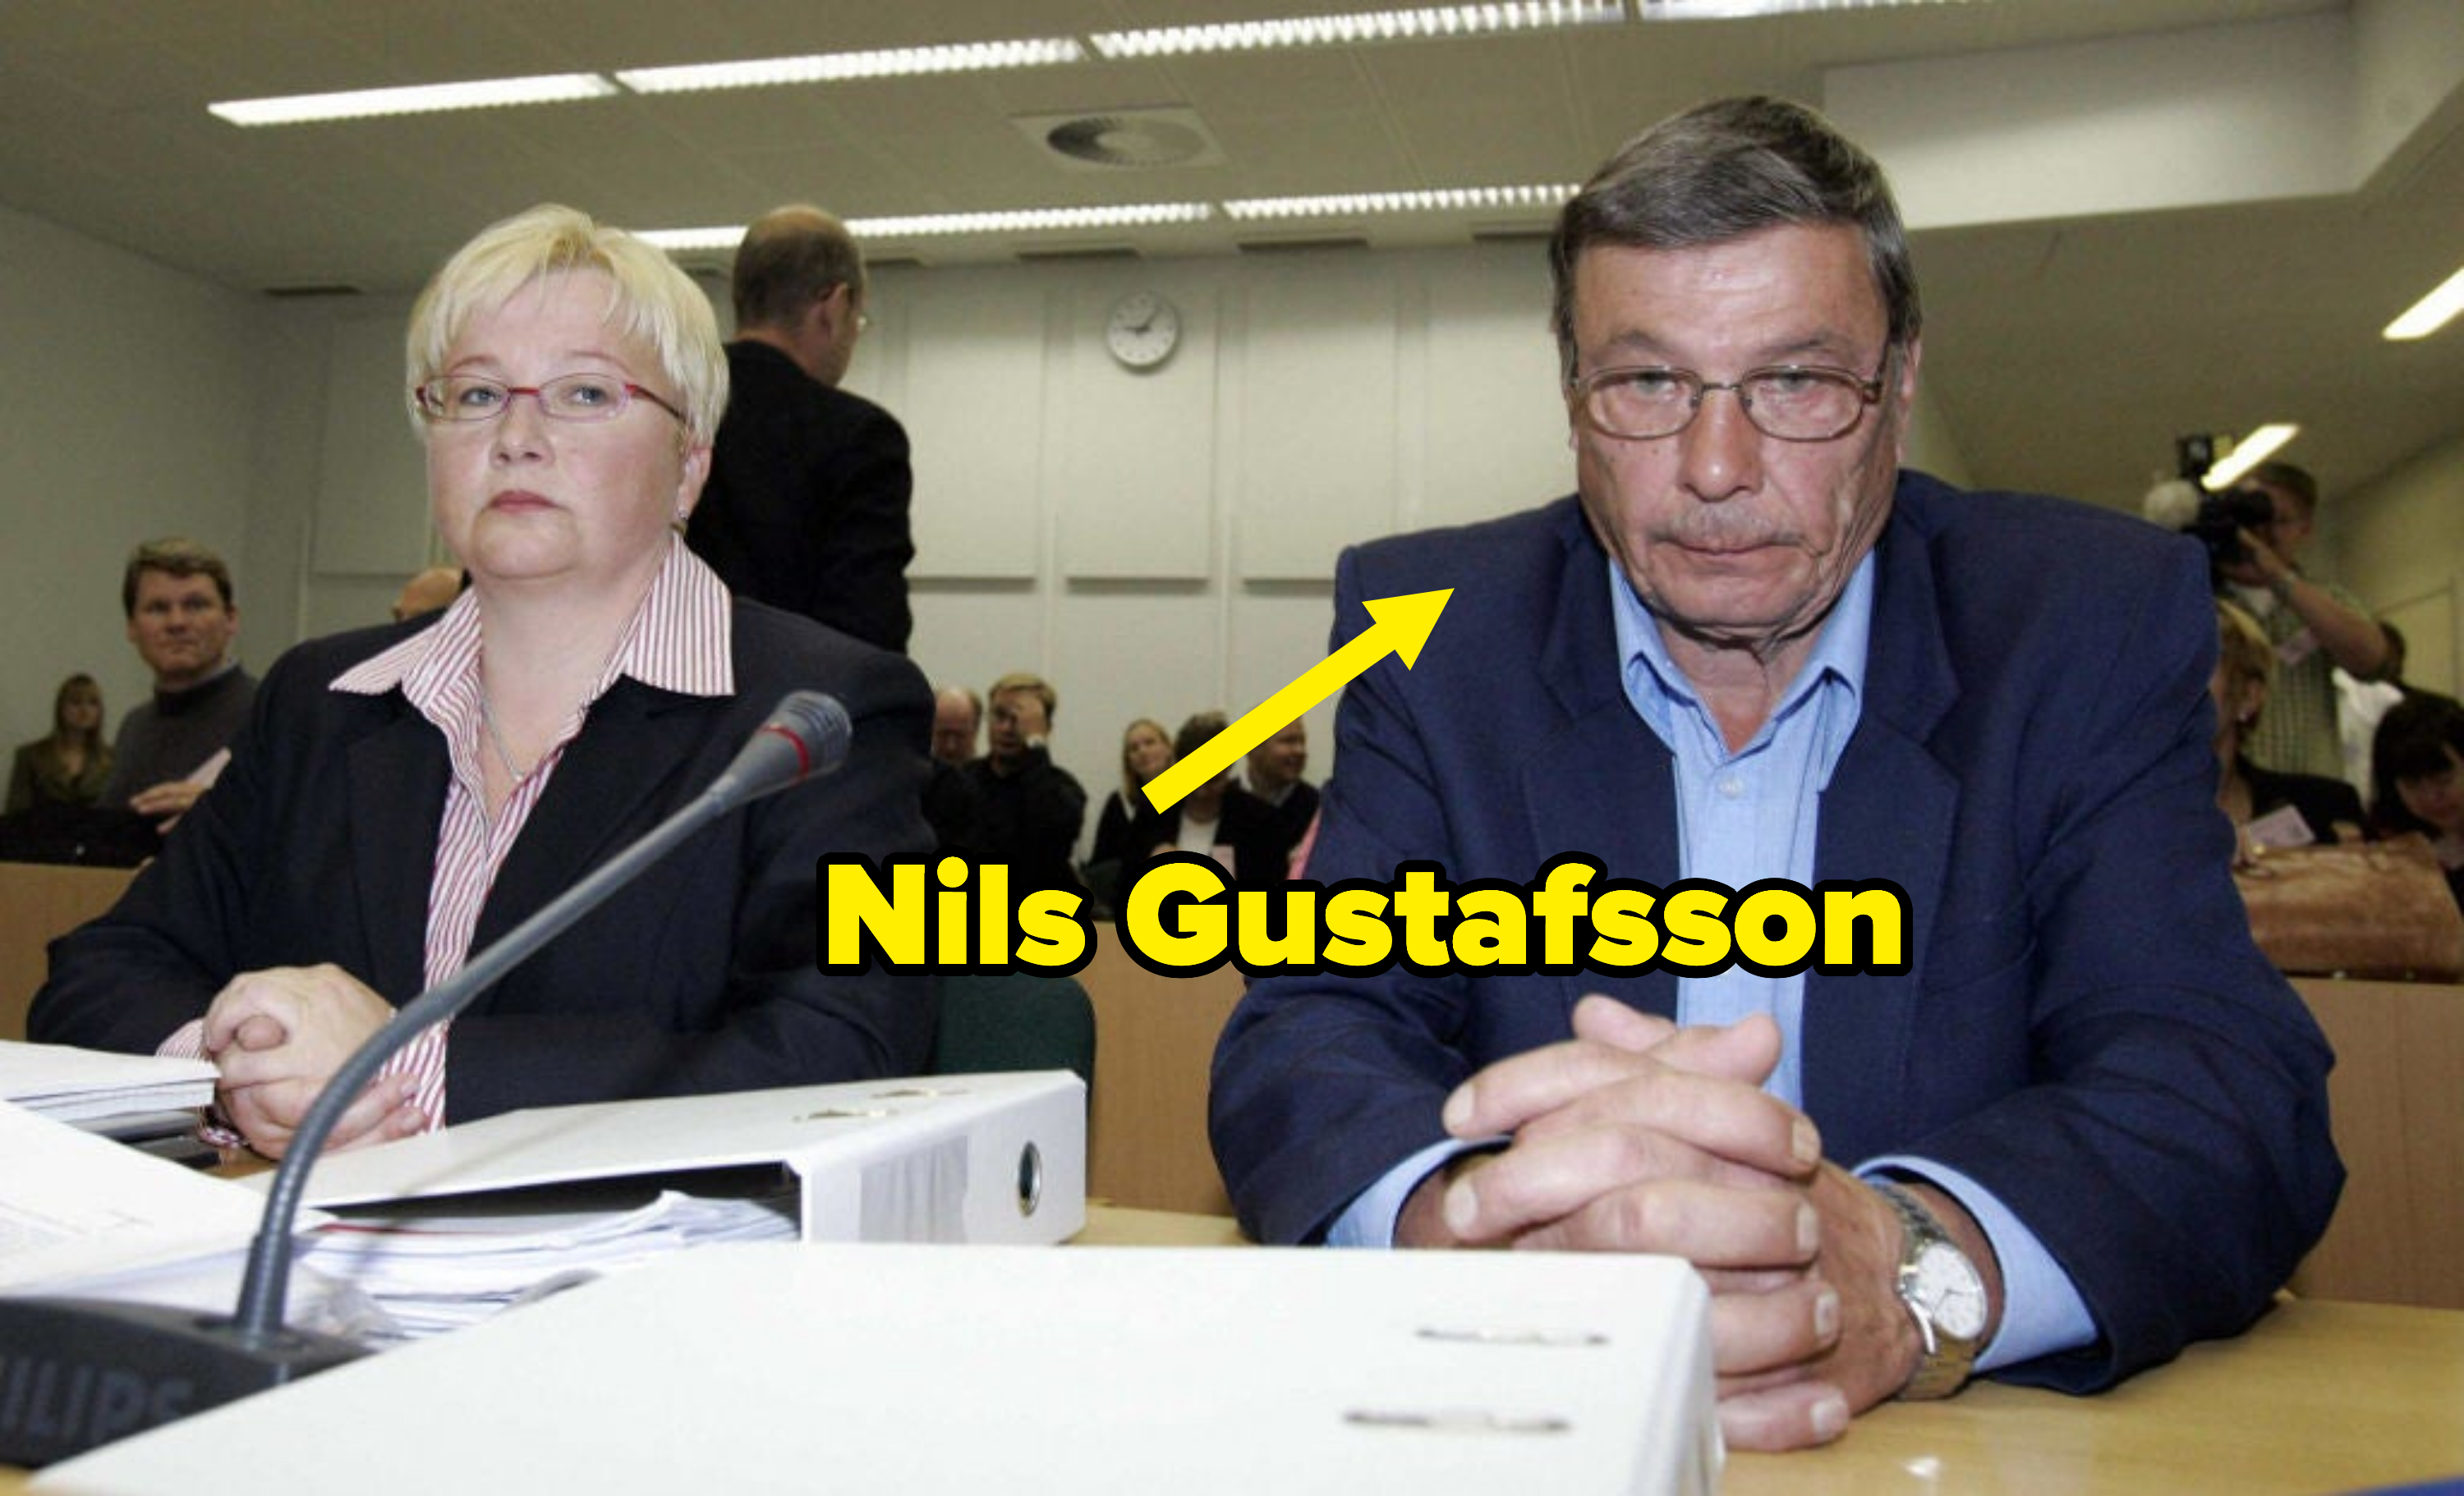 Nils standing trial